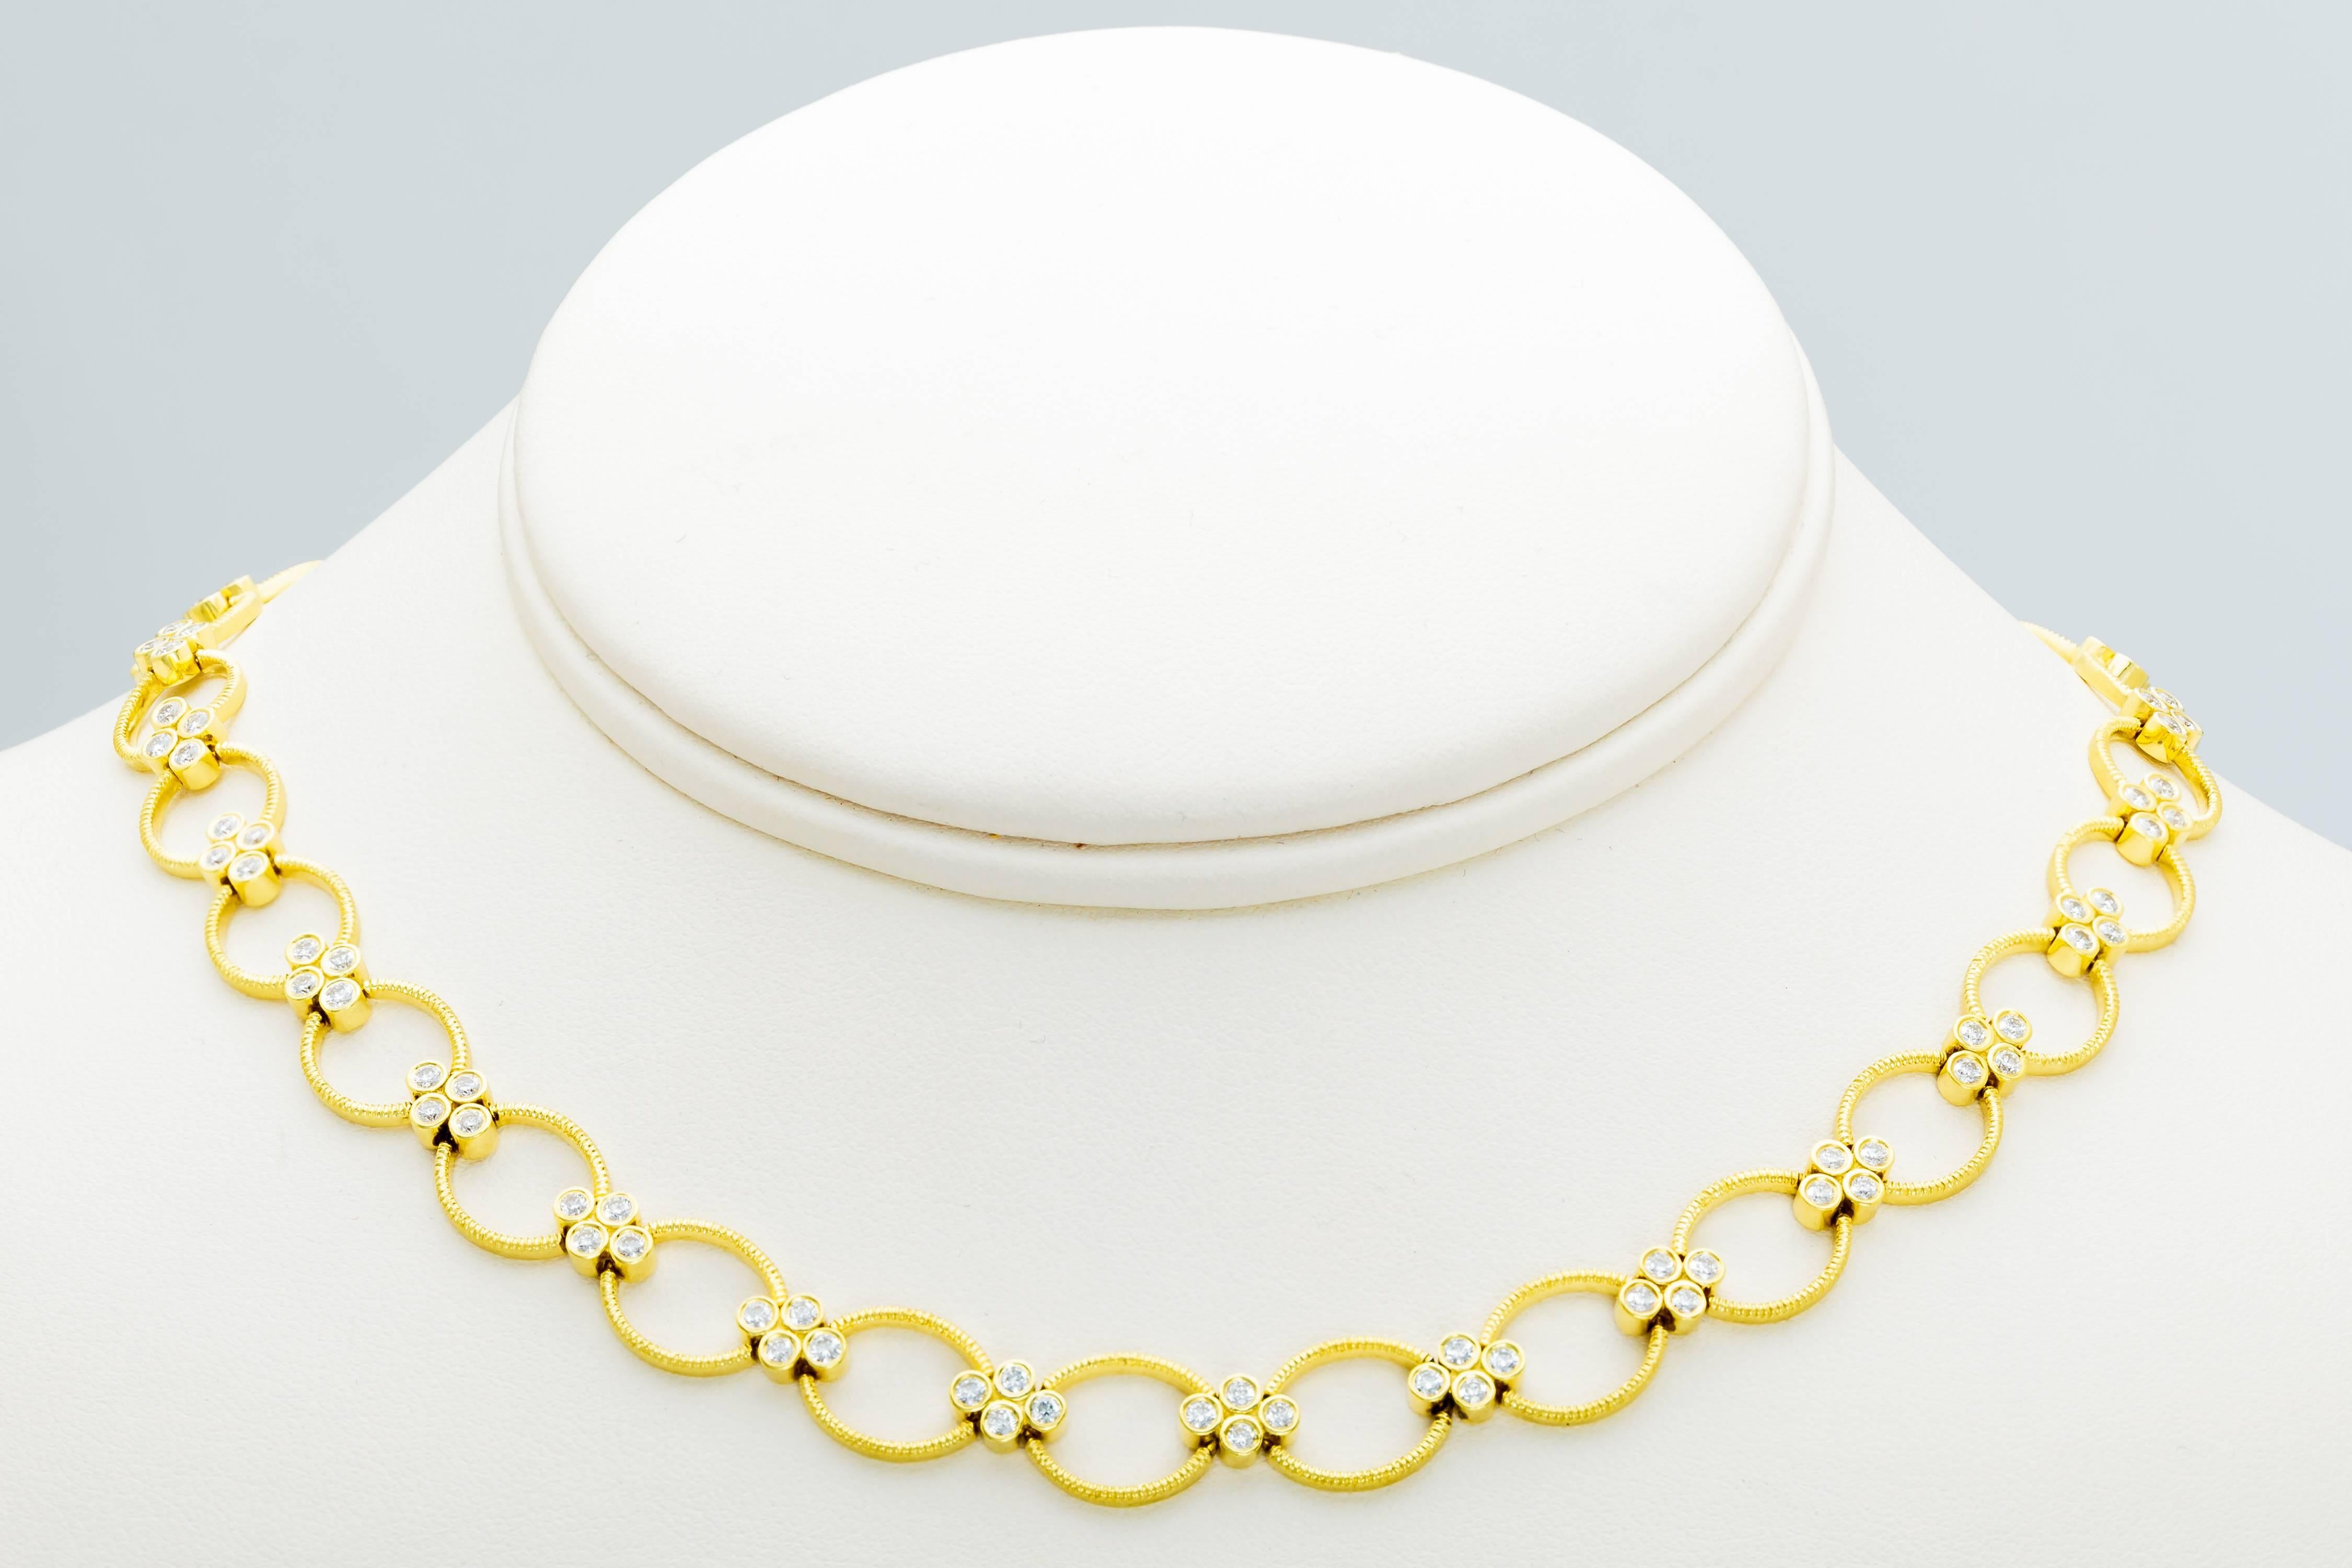 This 18K yellow gold Leslie Greene necklace is set with 80 diamonds totaling 1.60ct.  It has a brushed finish on the sides and back.  The necklace measures 15